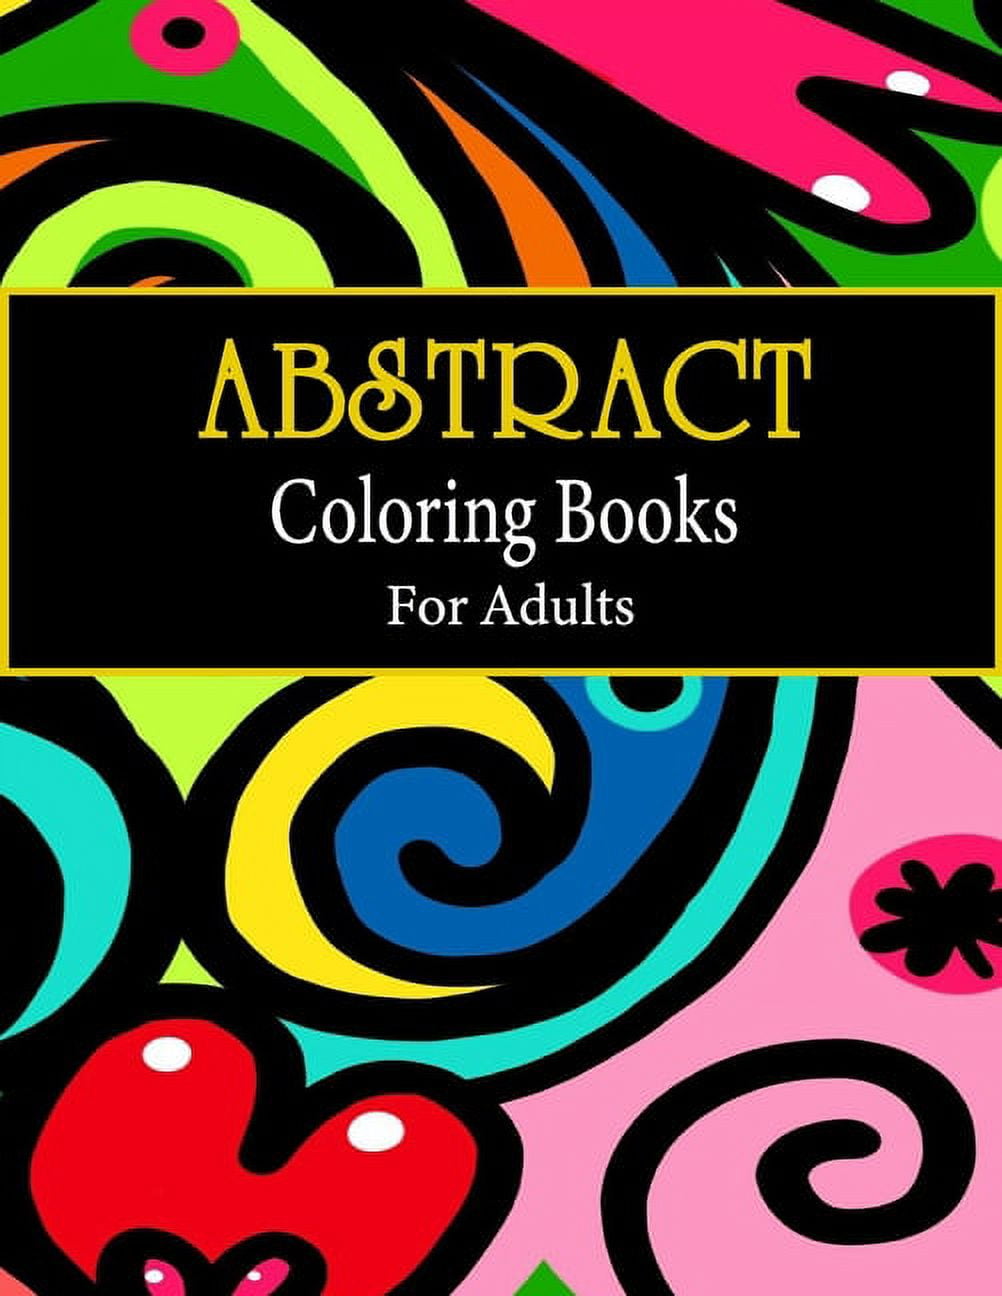 Abstract Coloring Book for Adults: Coloring Pages for Adults Coloring Book. Includes Beautiful Designs Hand Drawn,88 Pages Size 8.5*11 [Book]